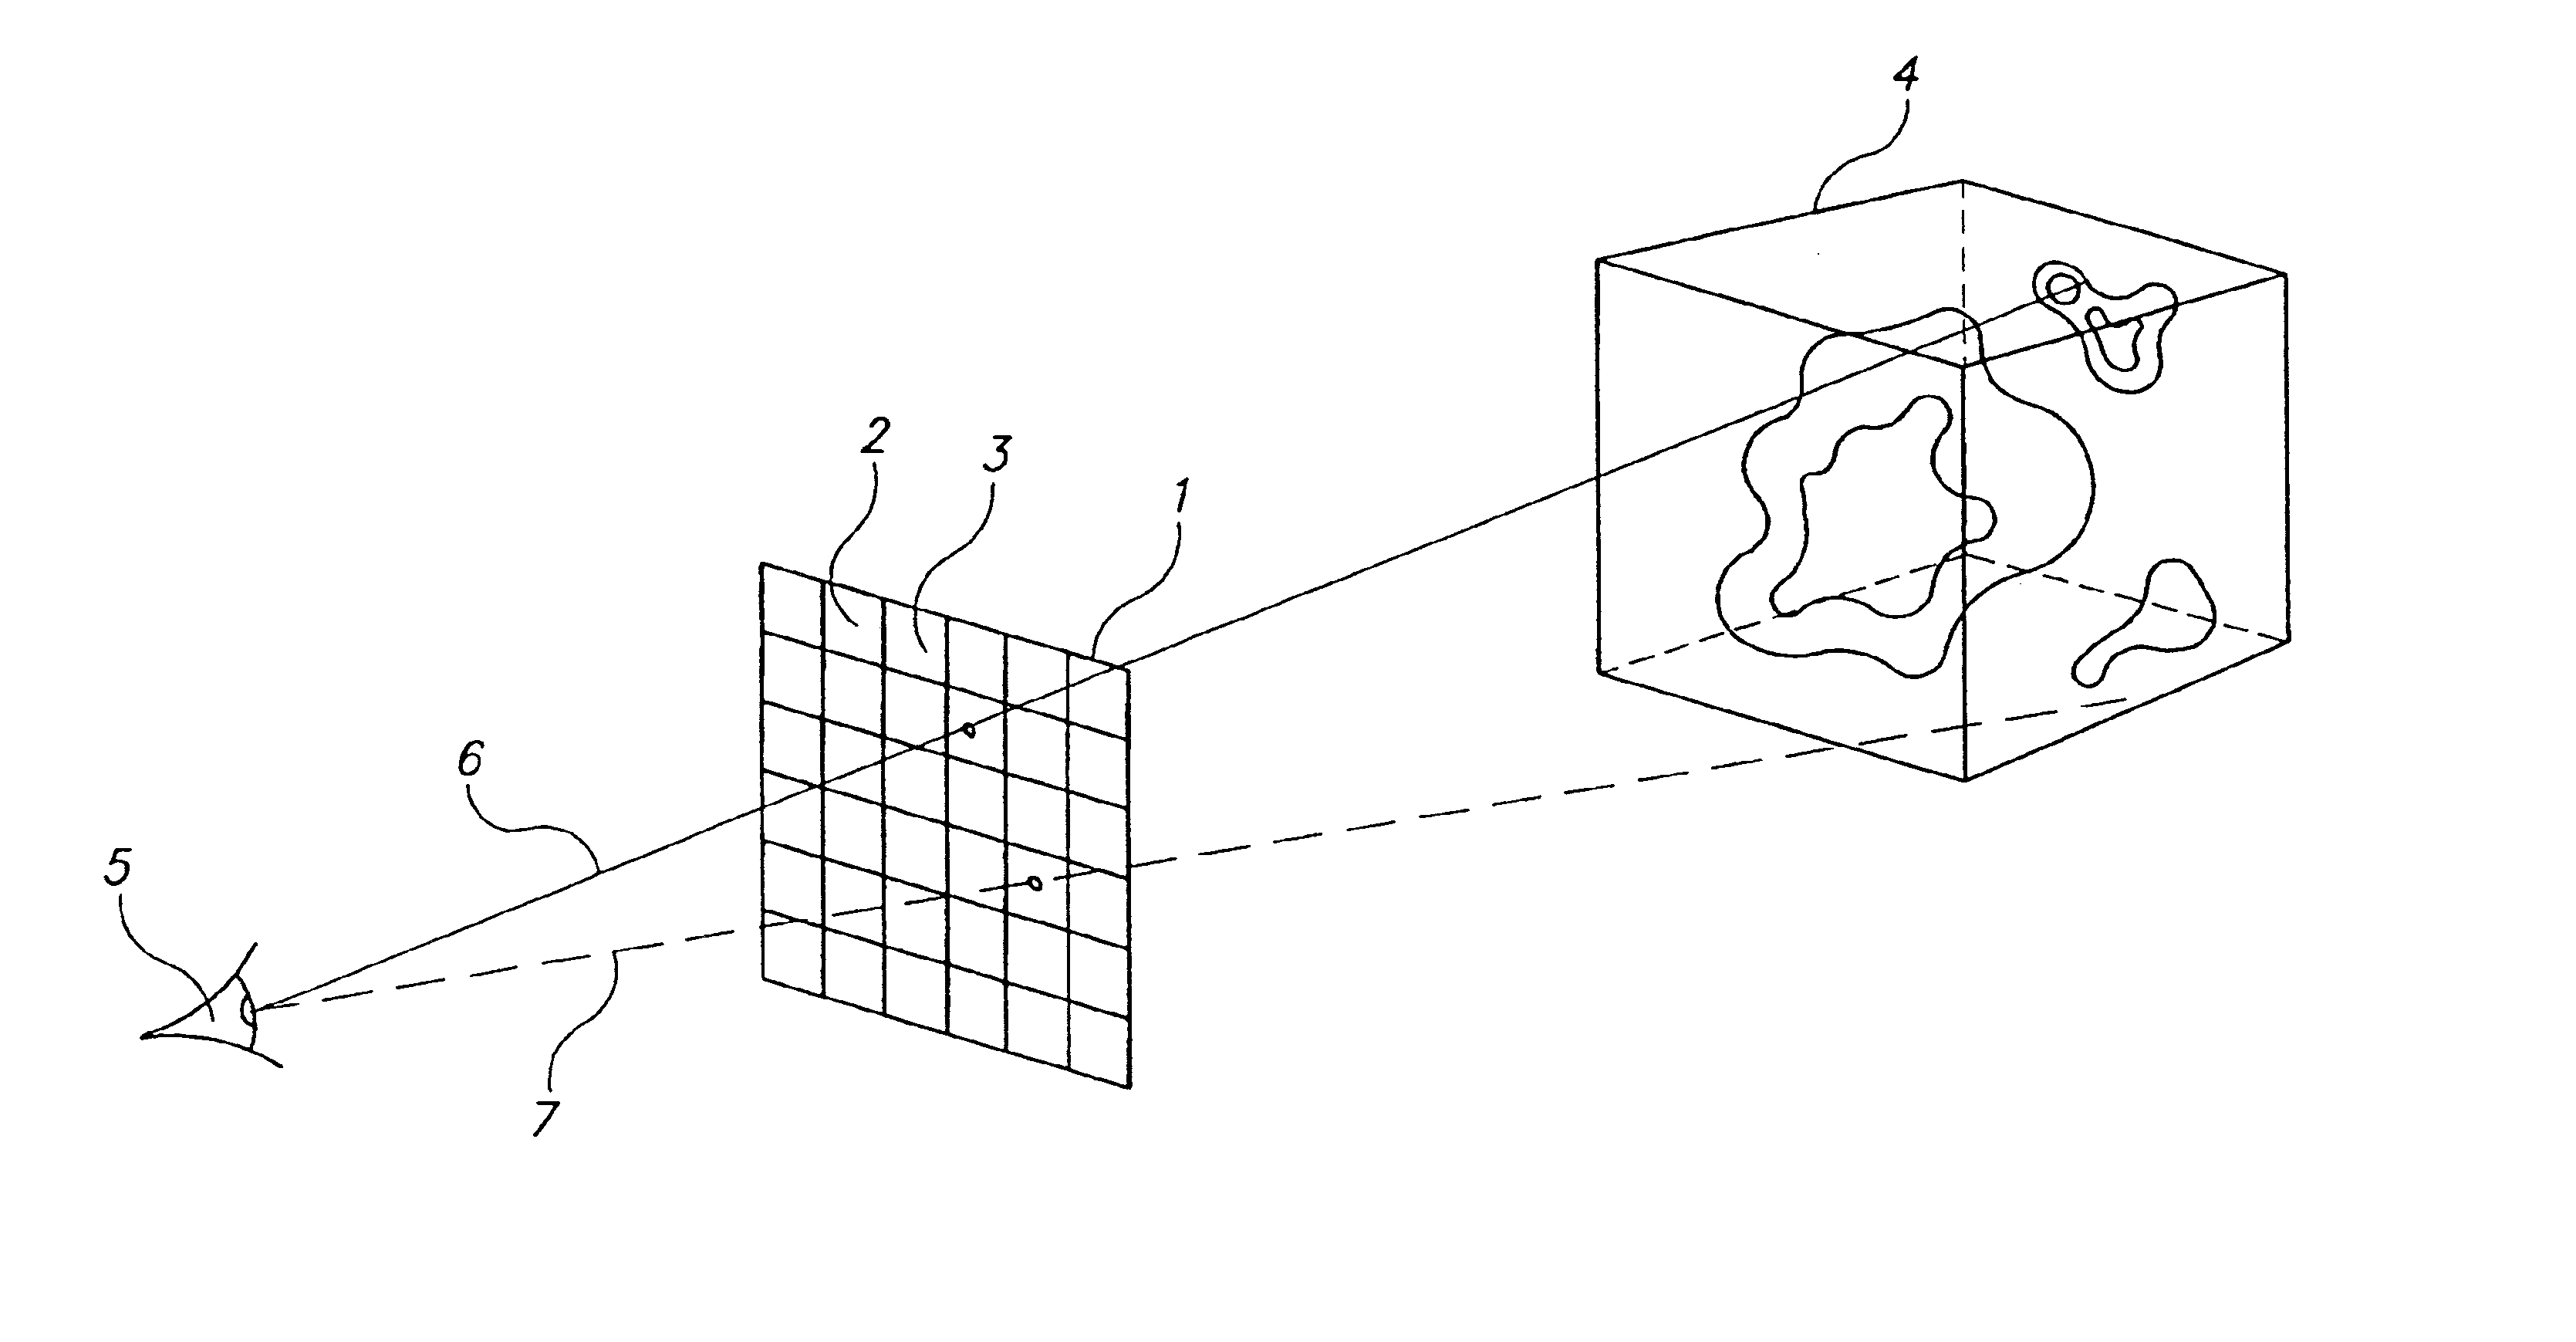 Method of forming a perspective rendering from a voxel space